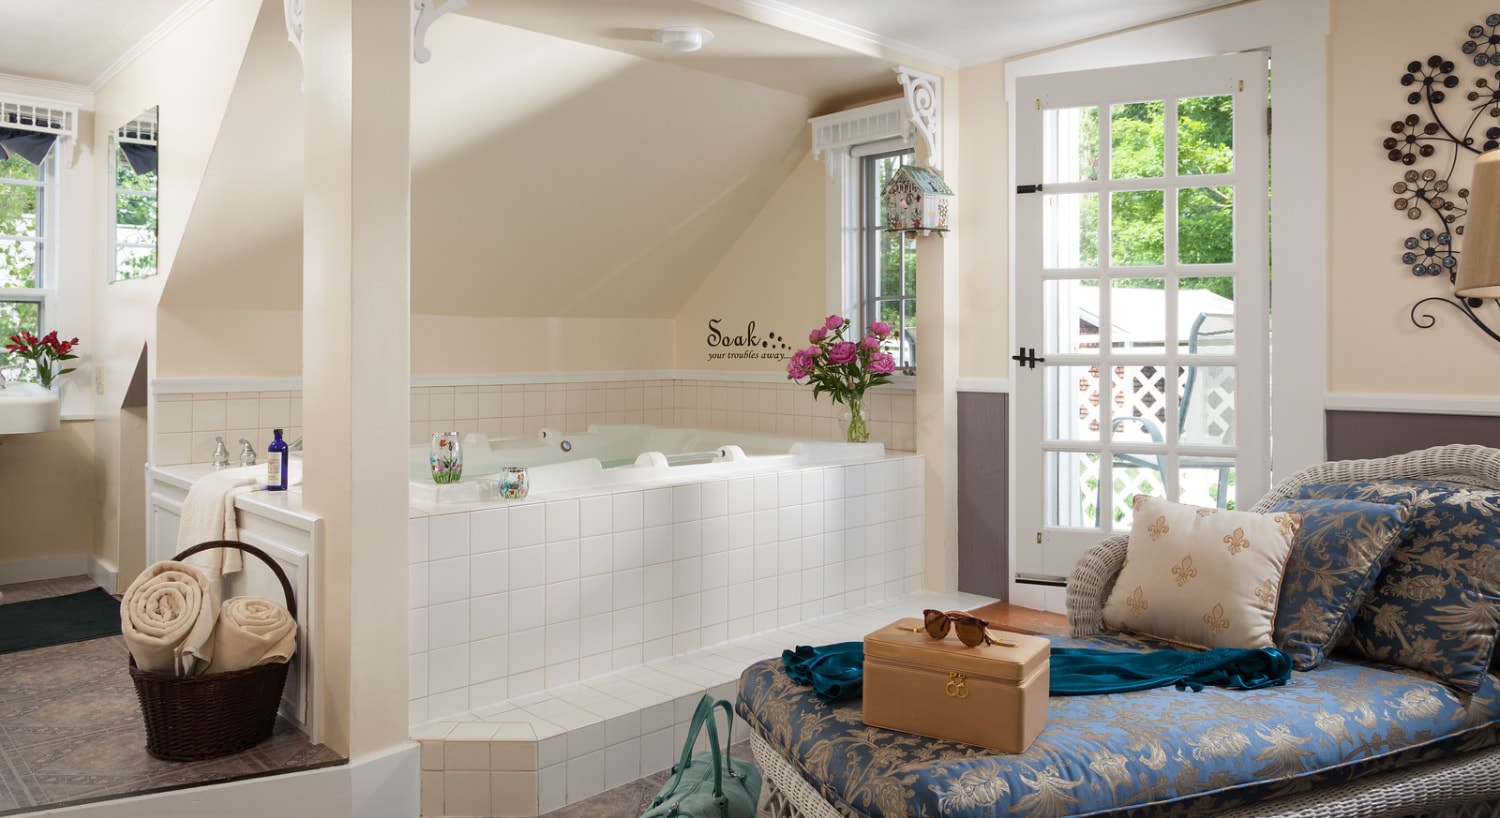 Large whirlpool tub surrounded by white tiles and light cream walls, next to a door to the balcony, and white wicker chaise with blue and gray floral cushions